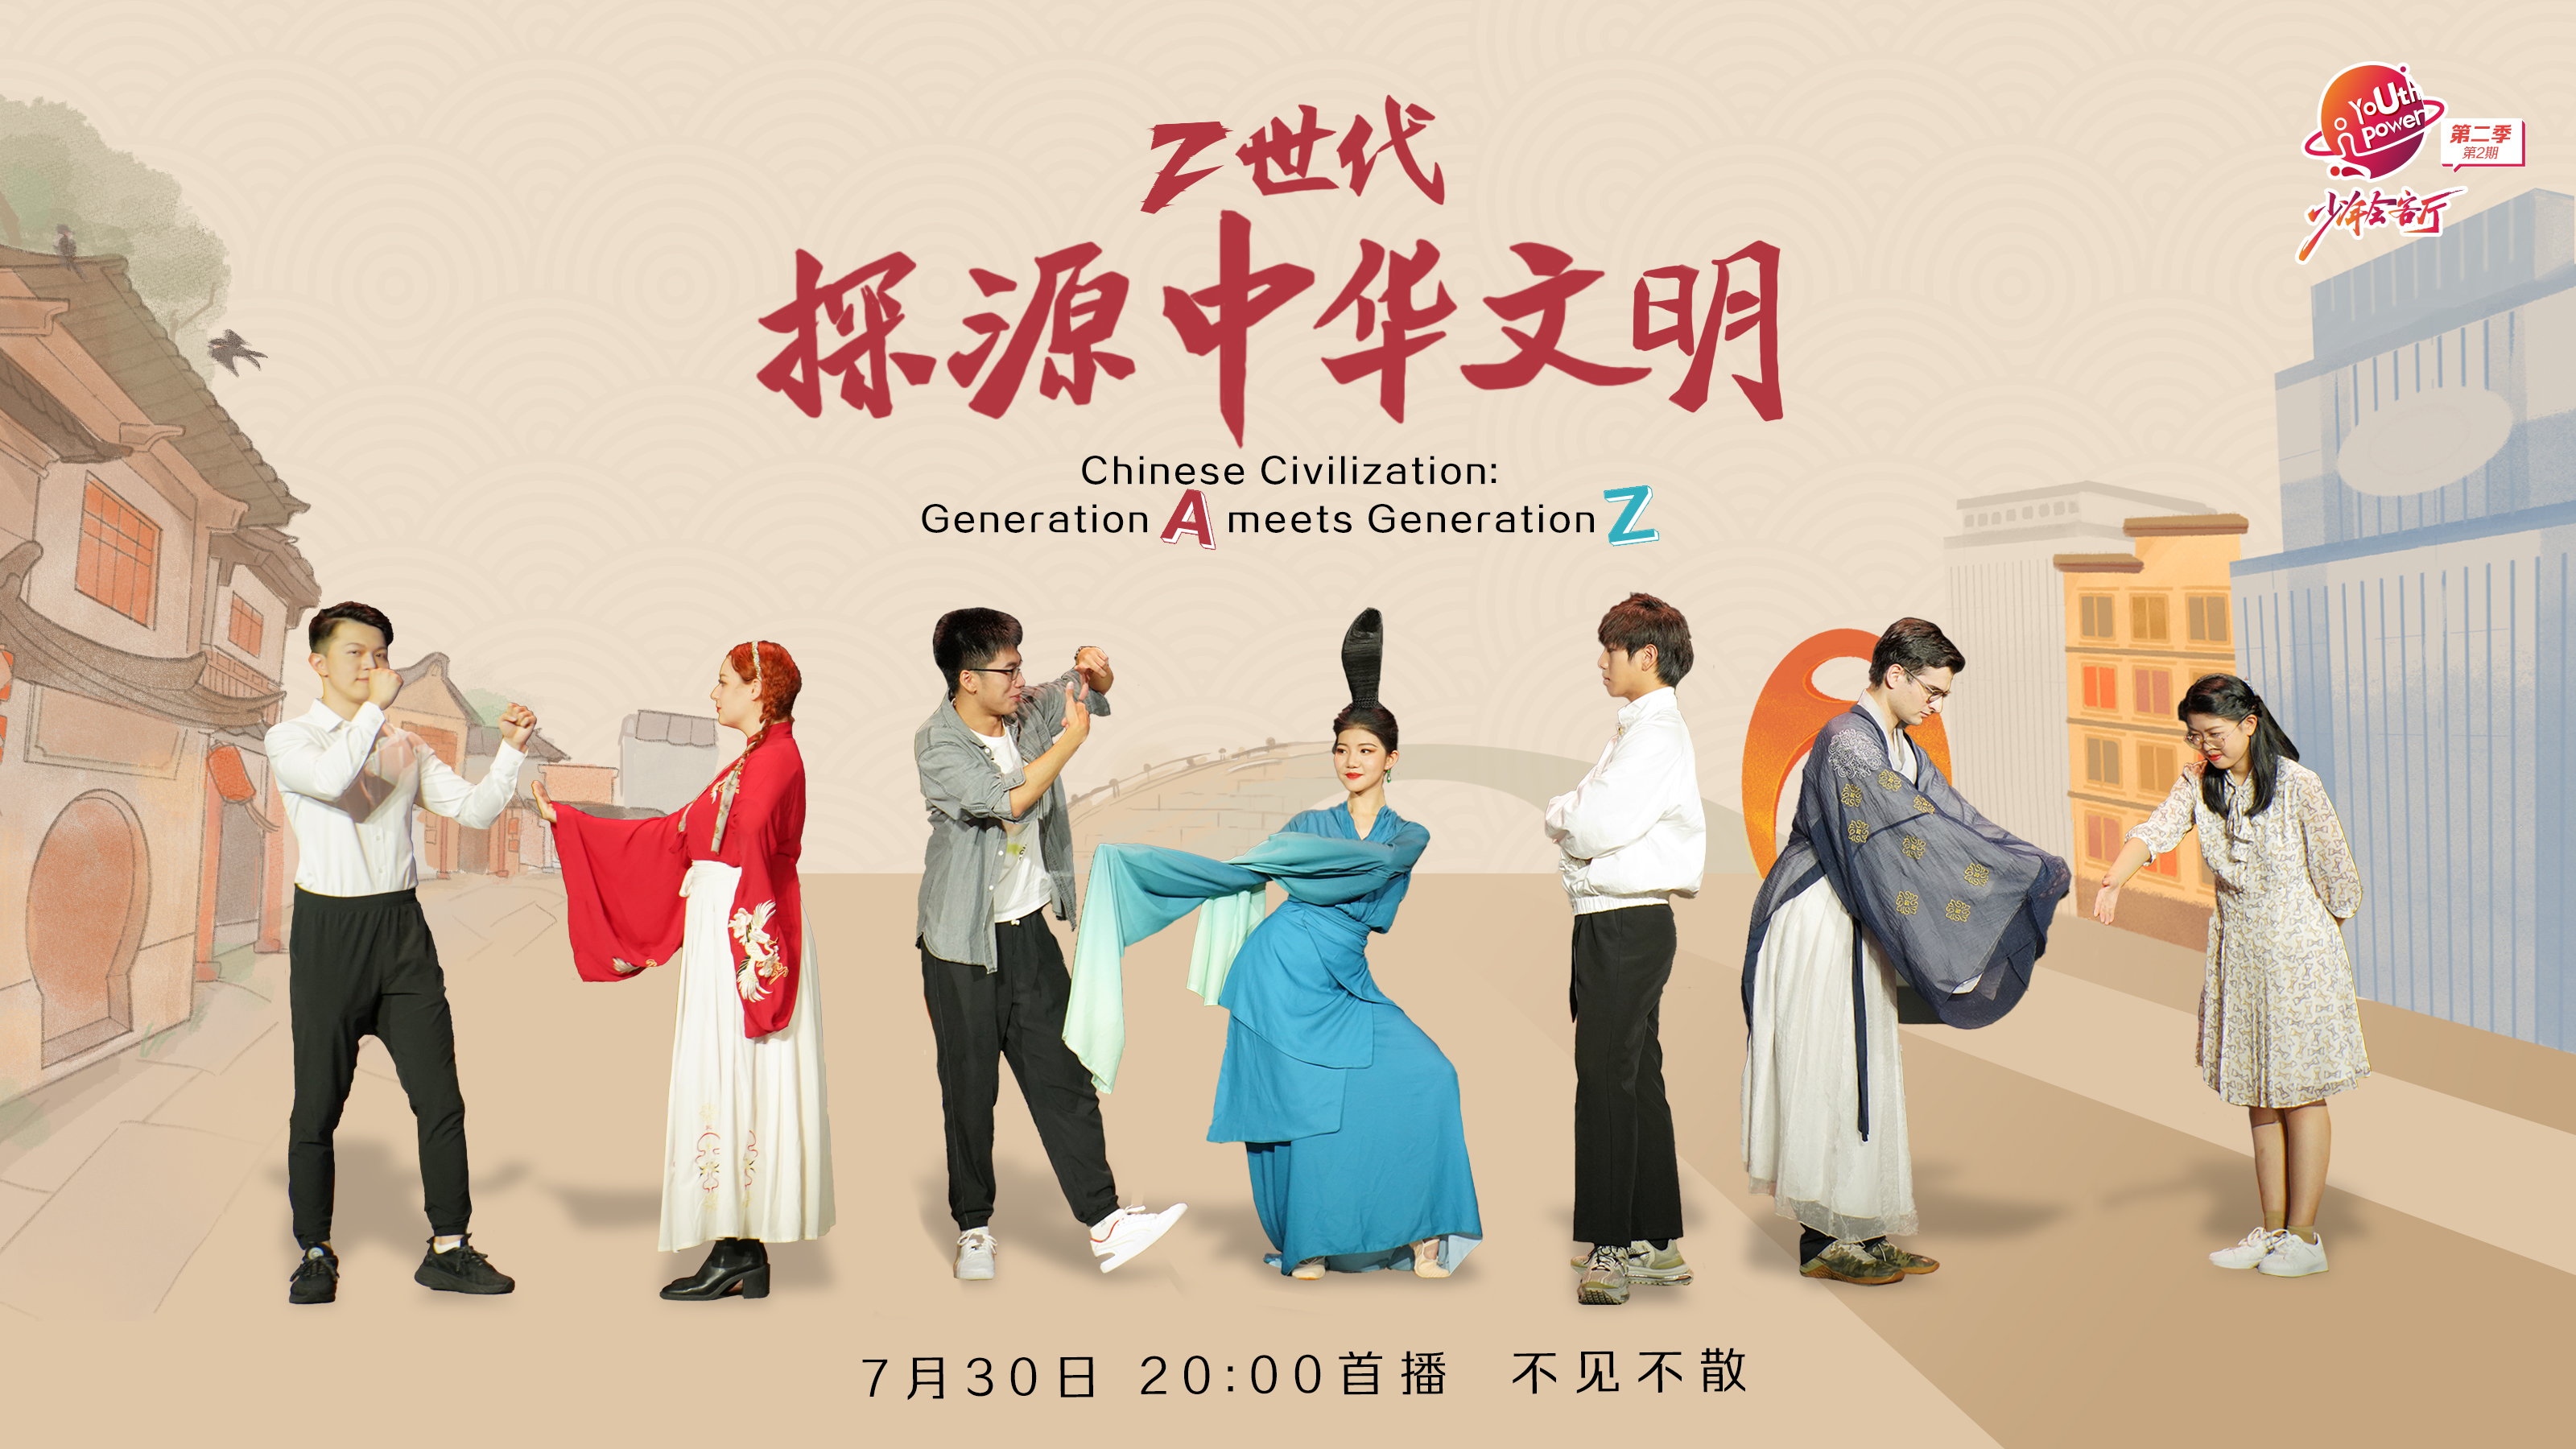 Watch it again: Youth Power brings cultural relics to life in Henan Museum